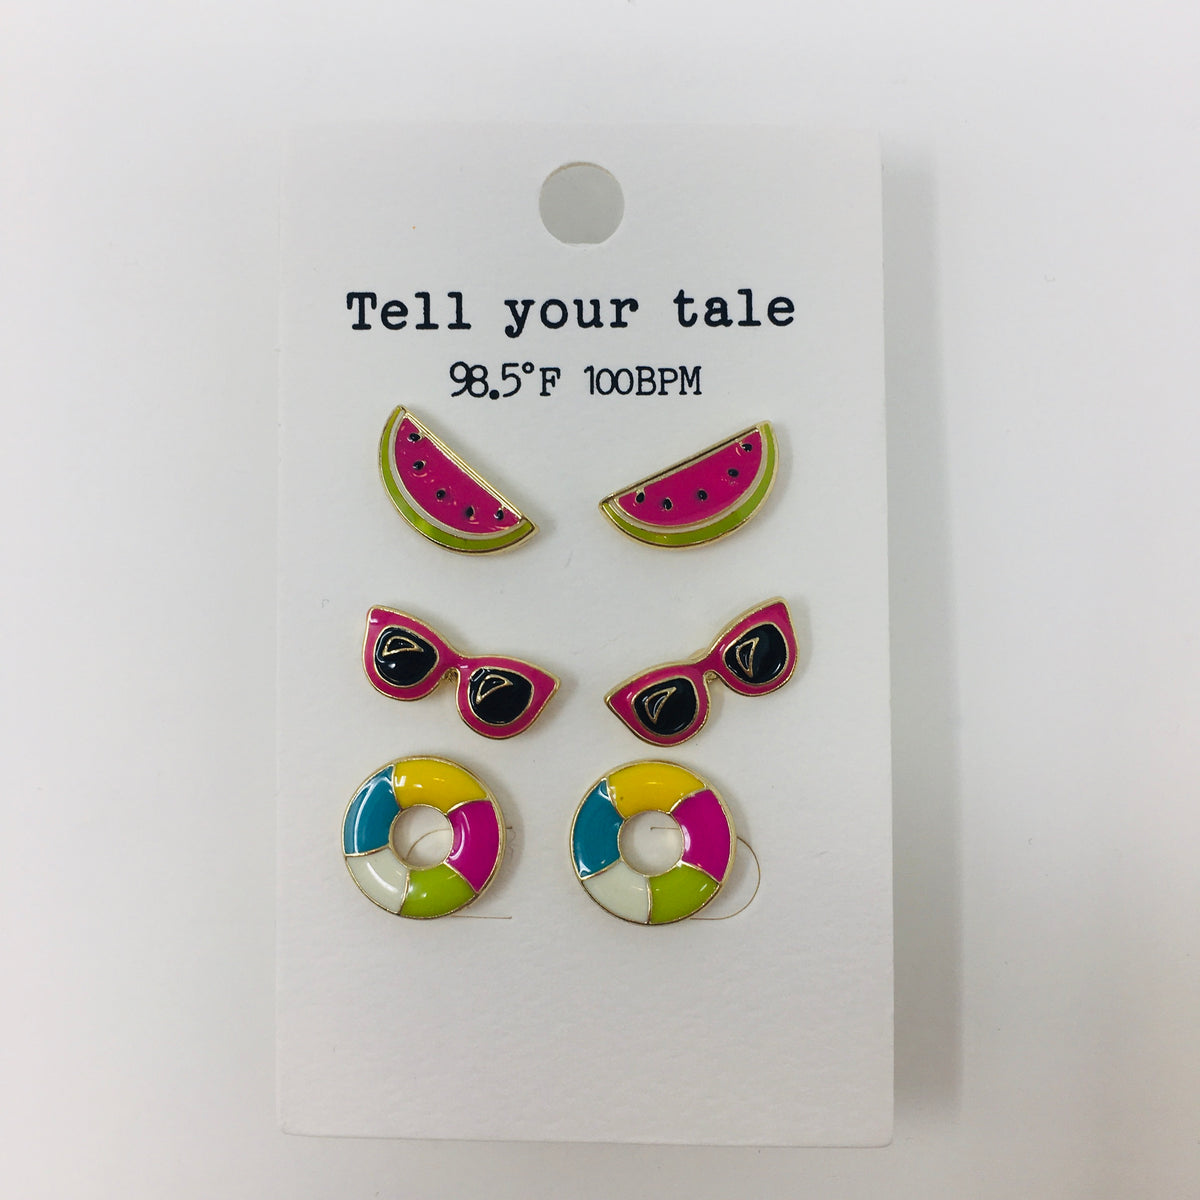 Set of 3 enamel colored post earrings on an ivory backer card showing pink watermelon slices, pink sunglasses, bright colored swim rings